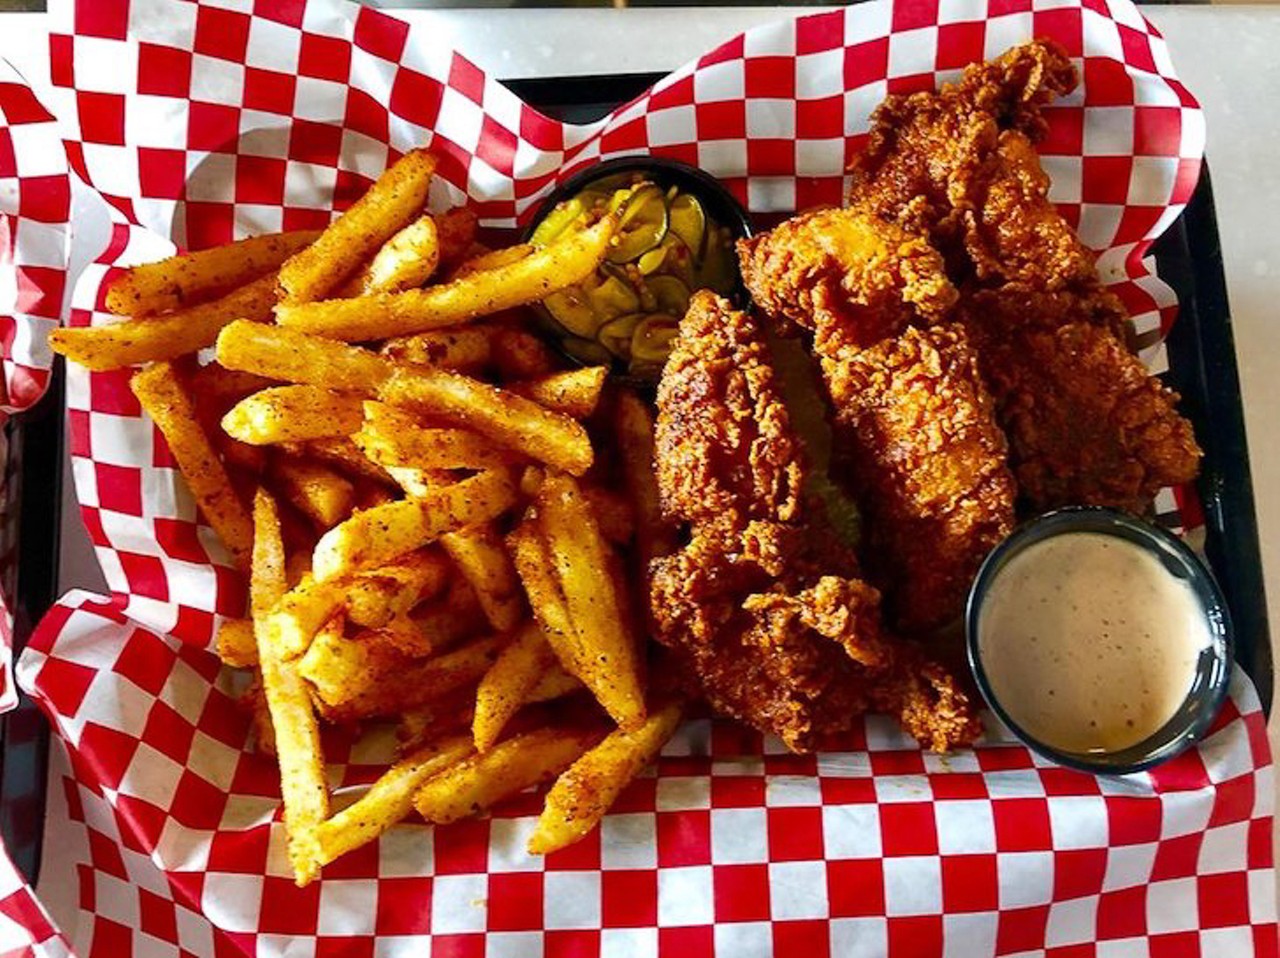 King of the Coop
813-232-2667, 6607 N. Florida Ave., Tampa. www.kingofthecoop.com  
Seminole Heights&#146; king of Nashville hot chicken has been slinging family meals and is still slangin&#146; bird on UberEats. 
Photo via King of the Coop/Facebook